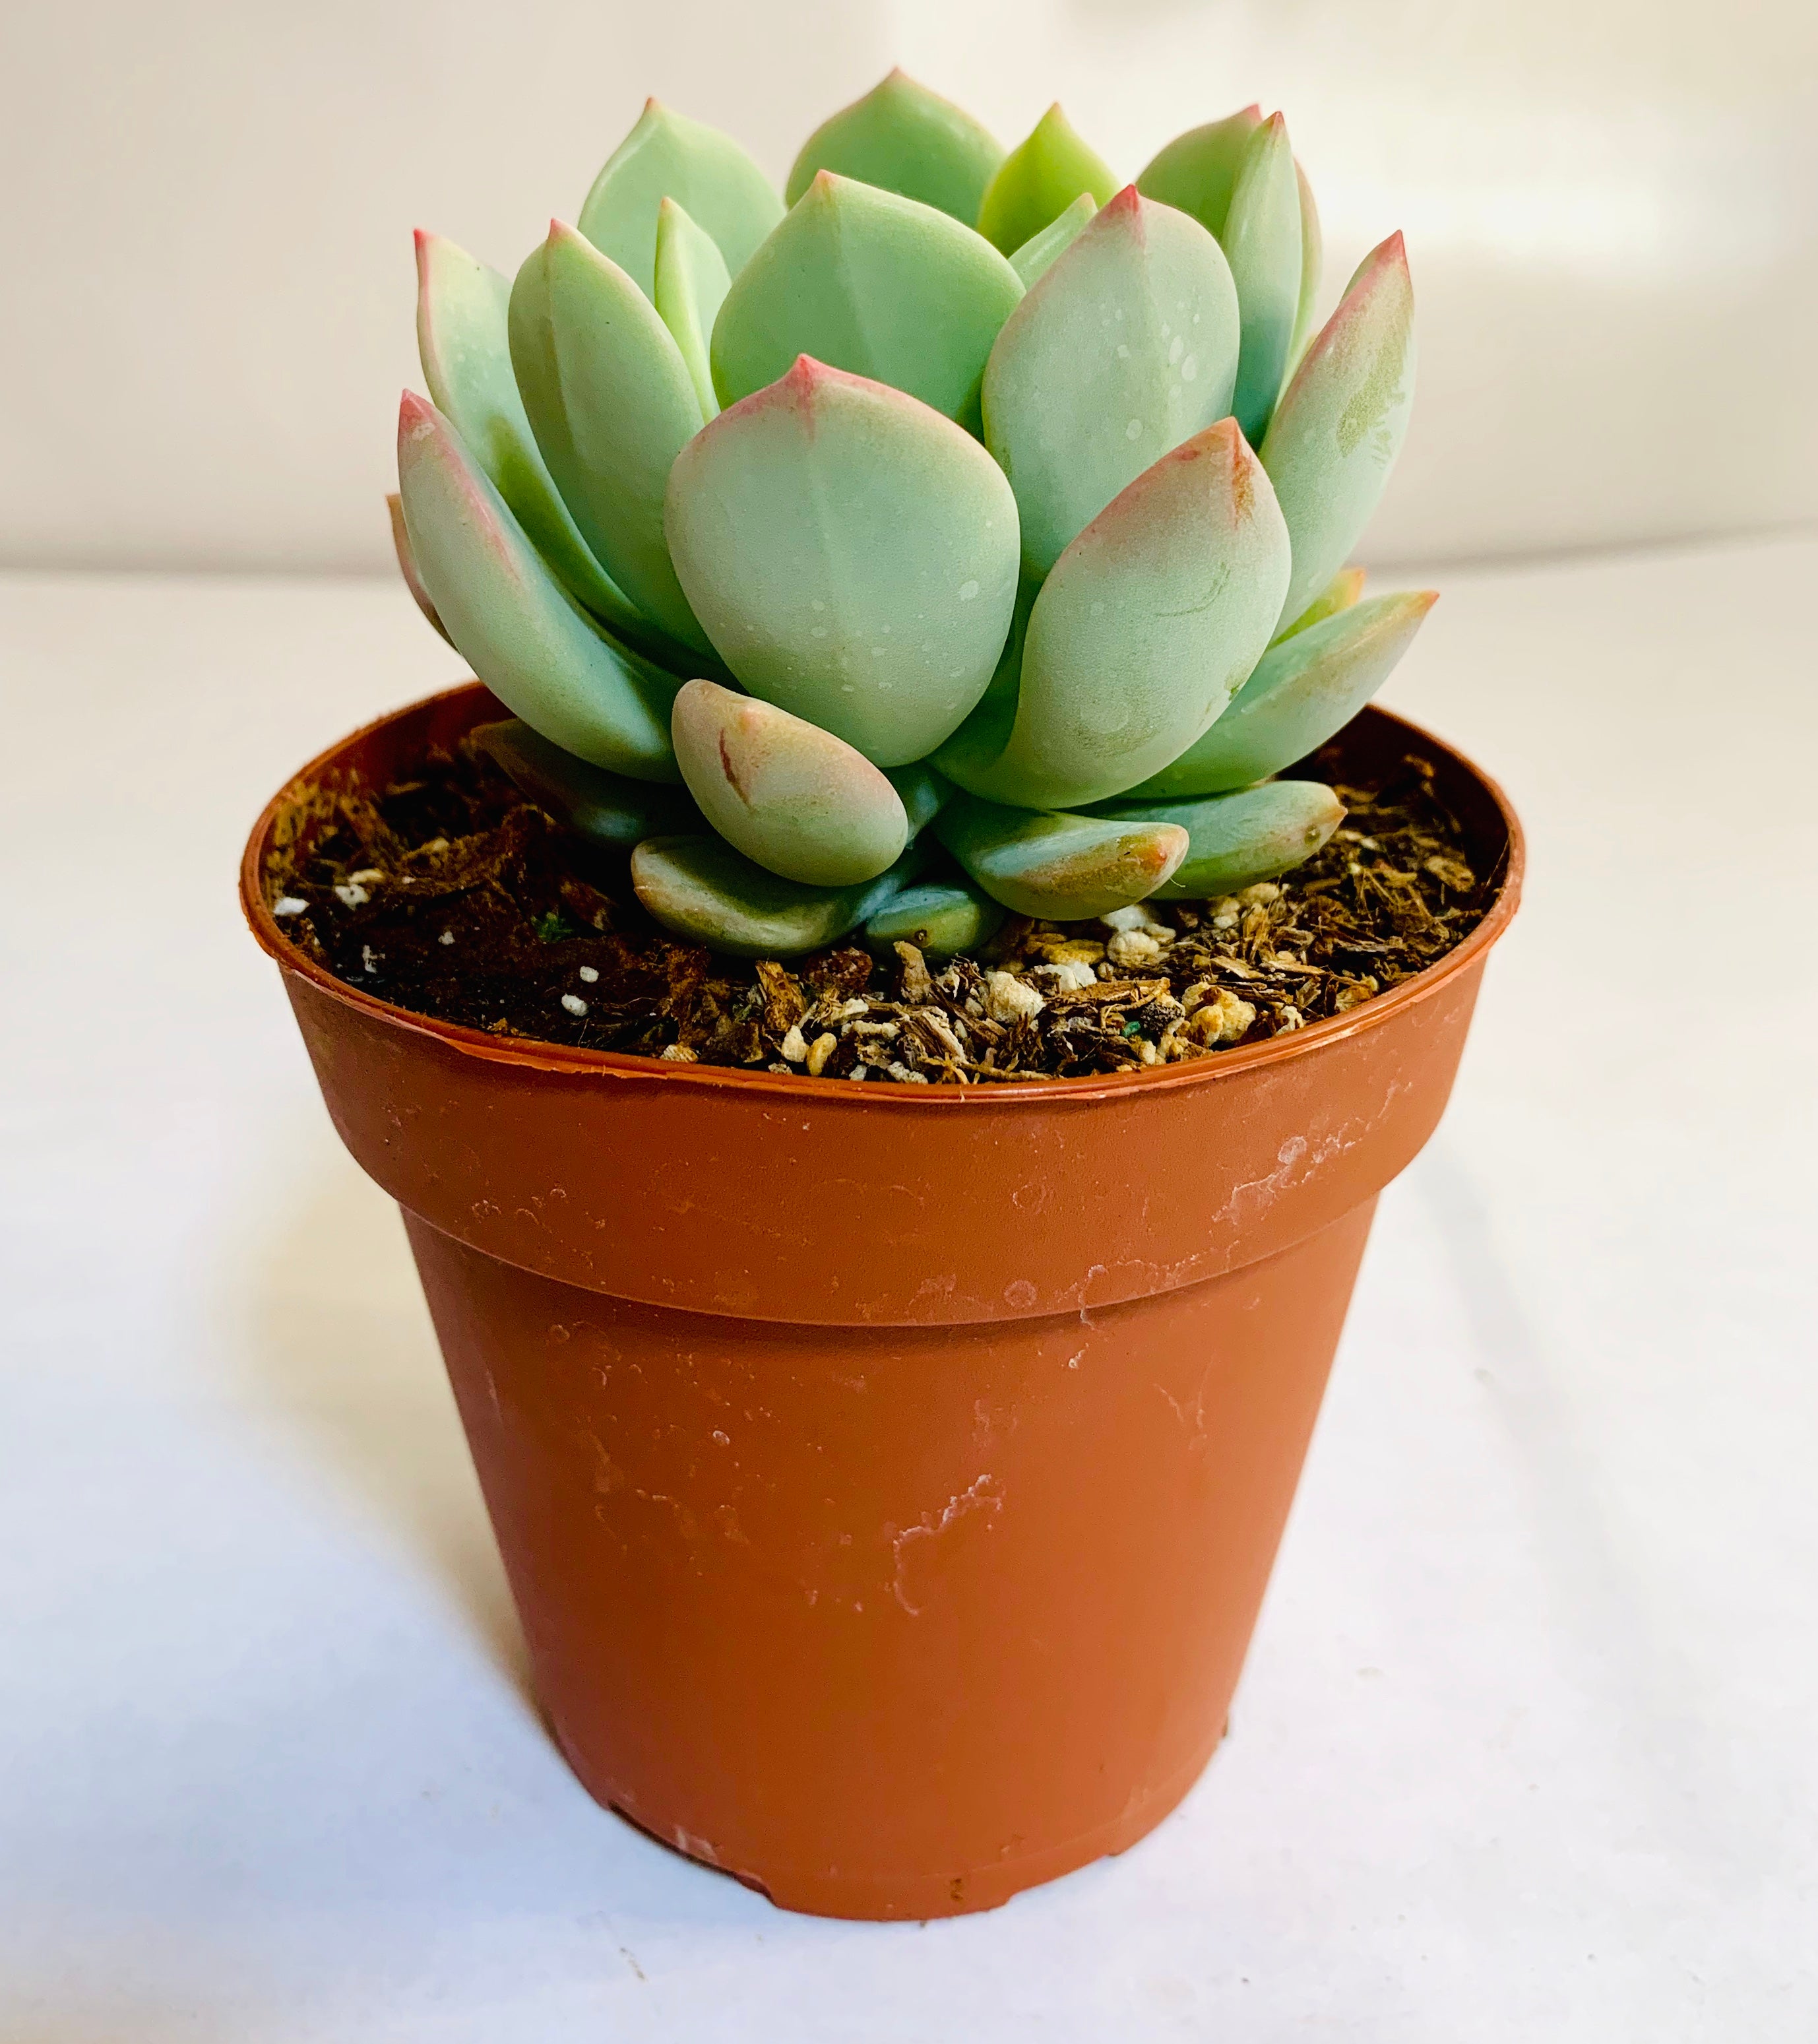 A pristine, single rosette-shaped succulent. The leaves are light blue-green, with rosy pink tips.